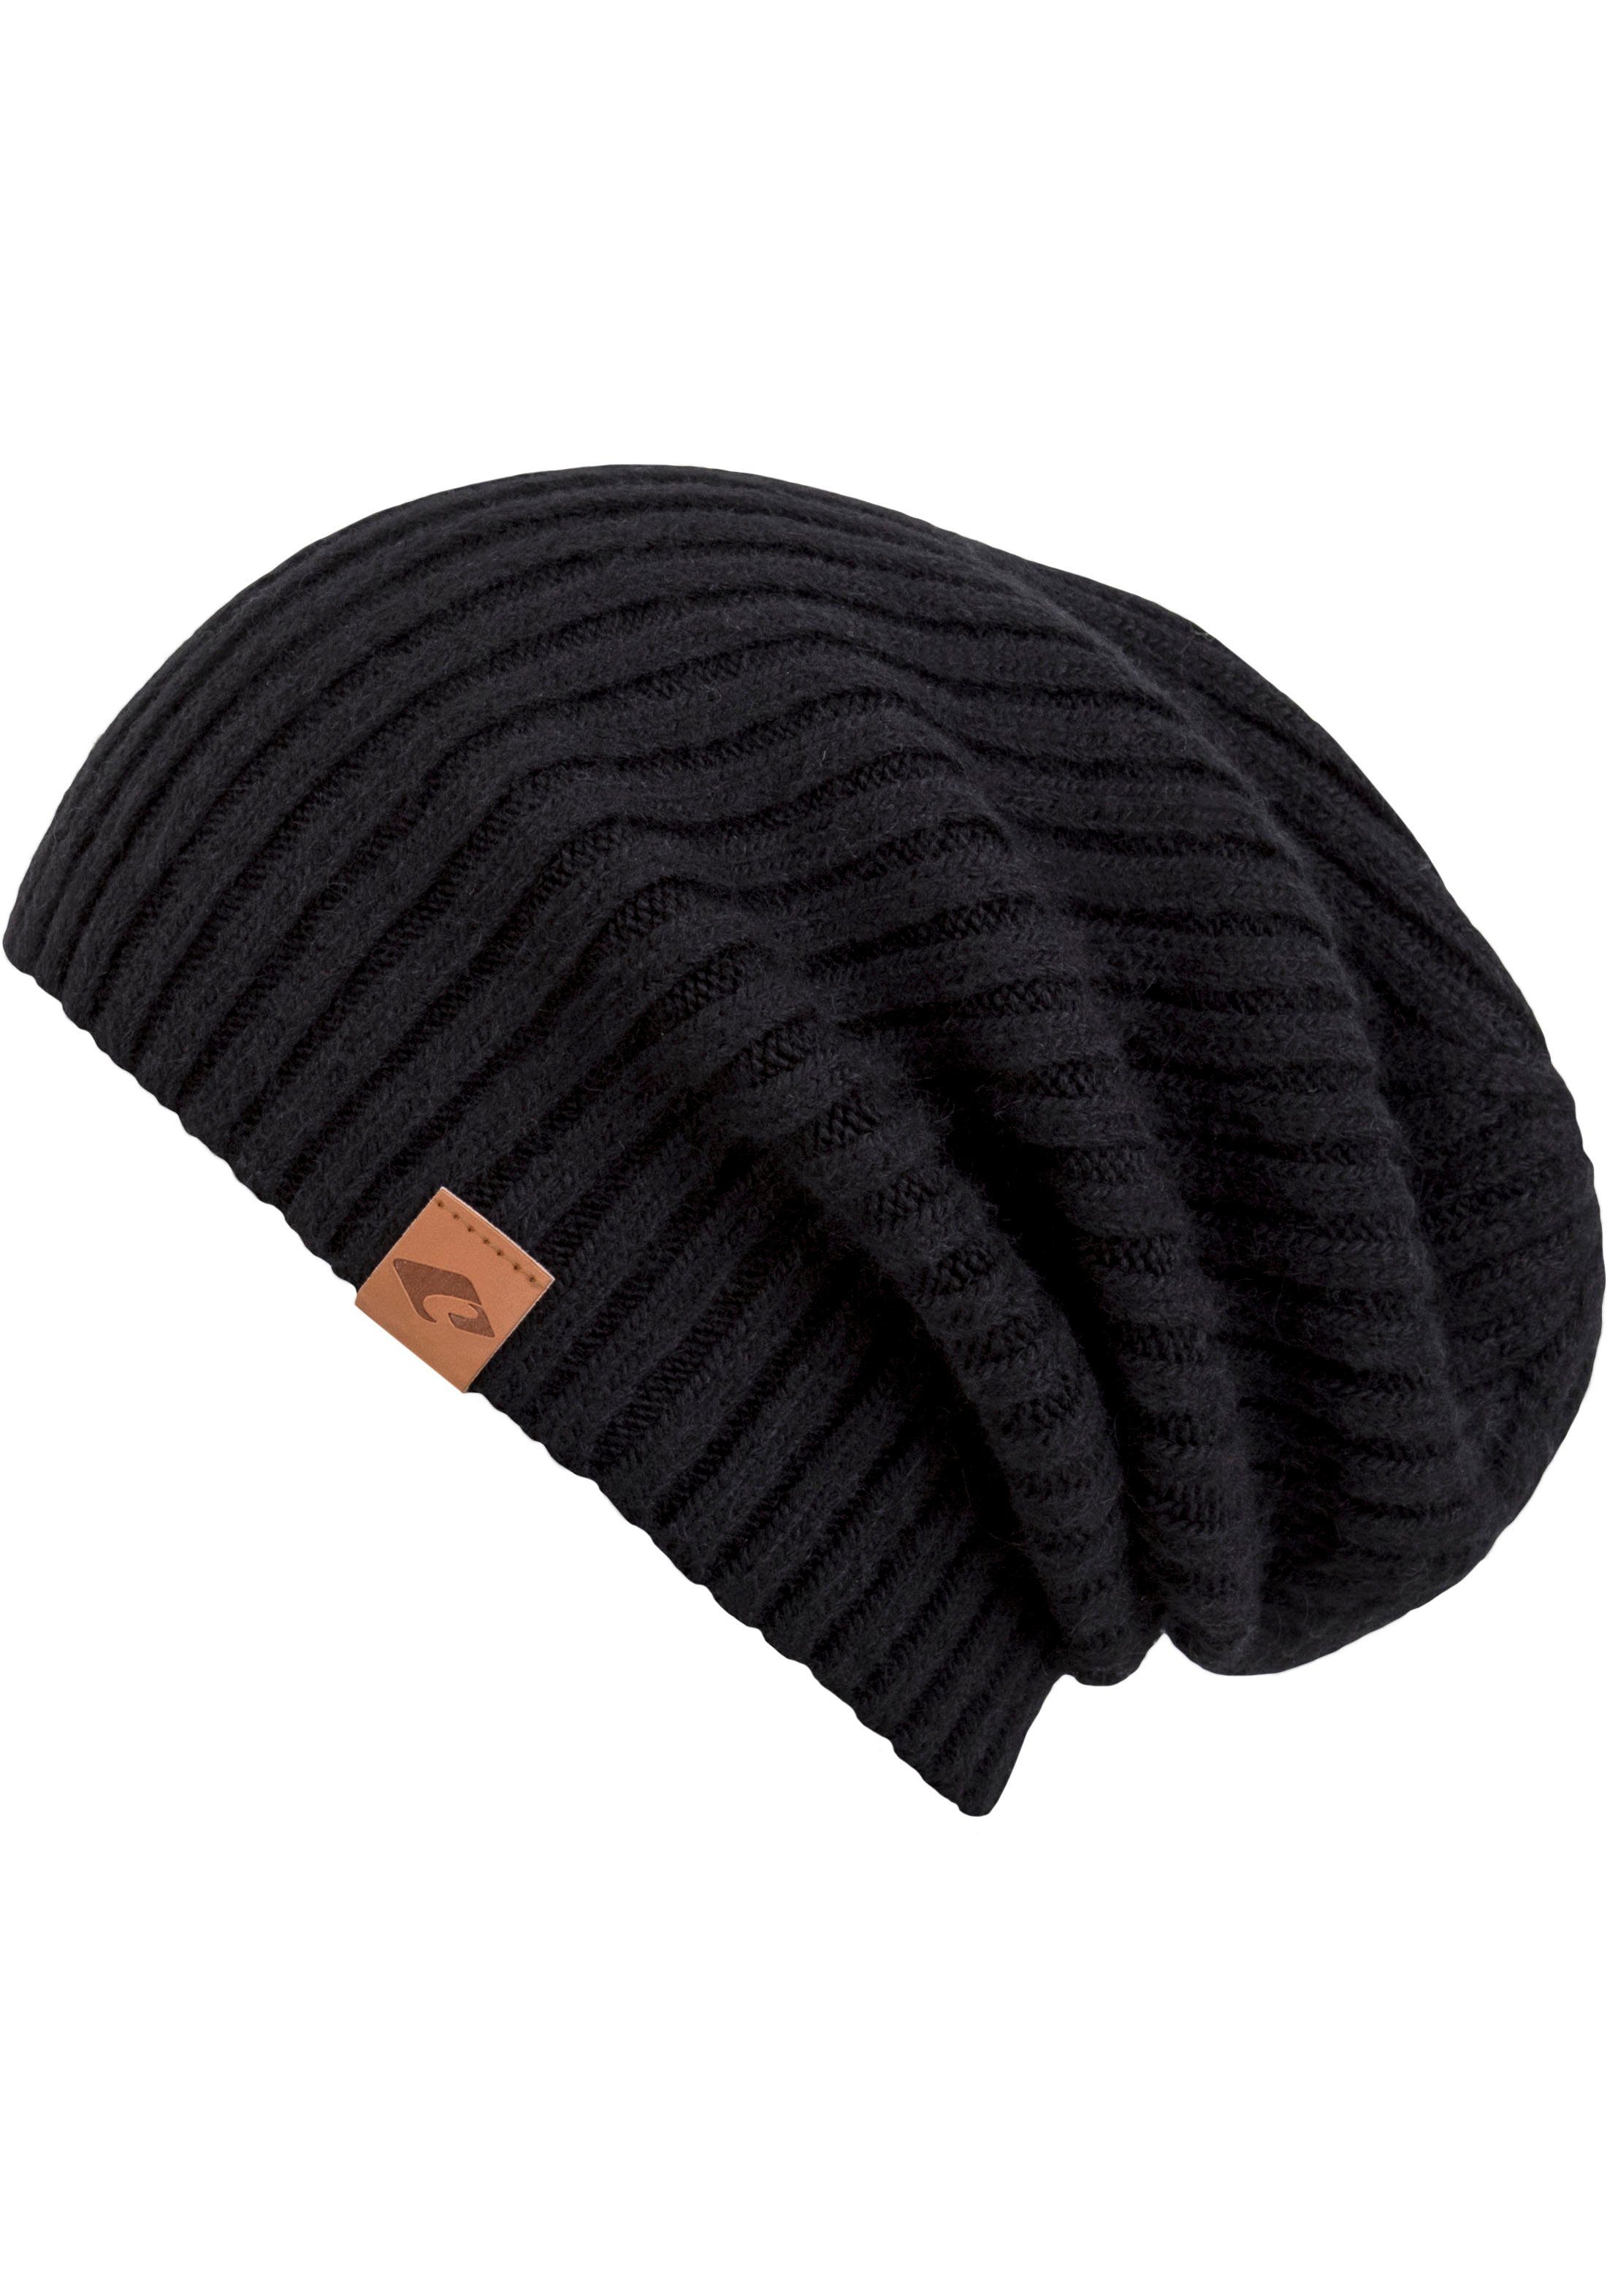 chillouts Beanie Justin Hat, ) One cm flexibel 58-62 ( Size ca